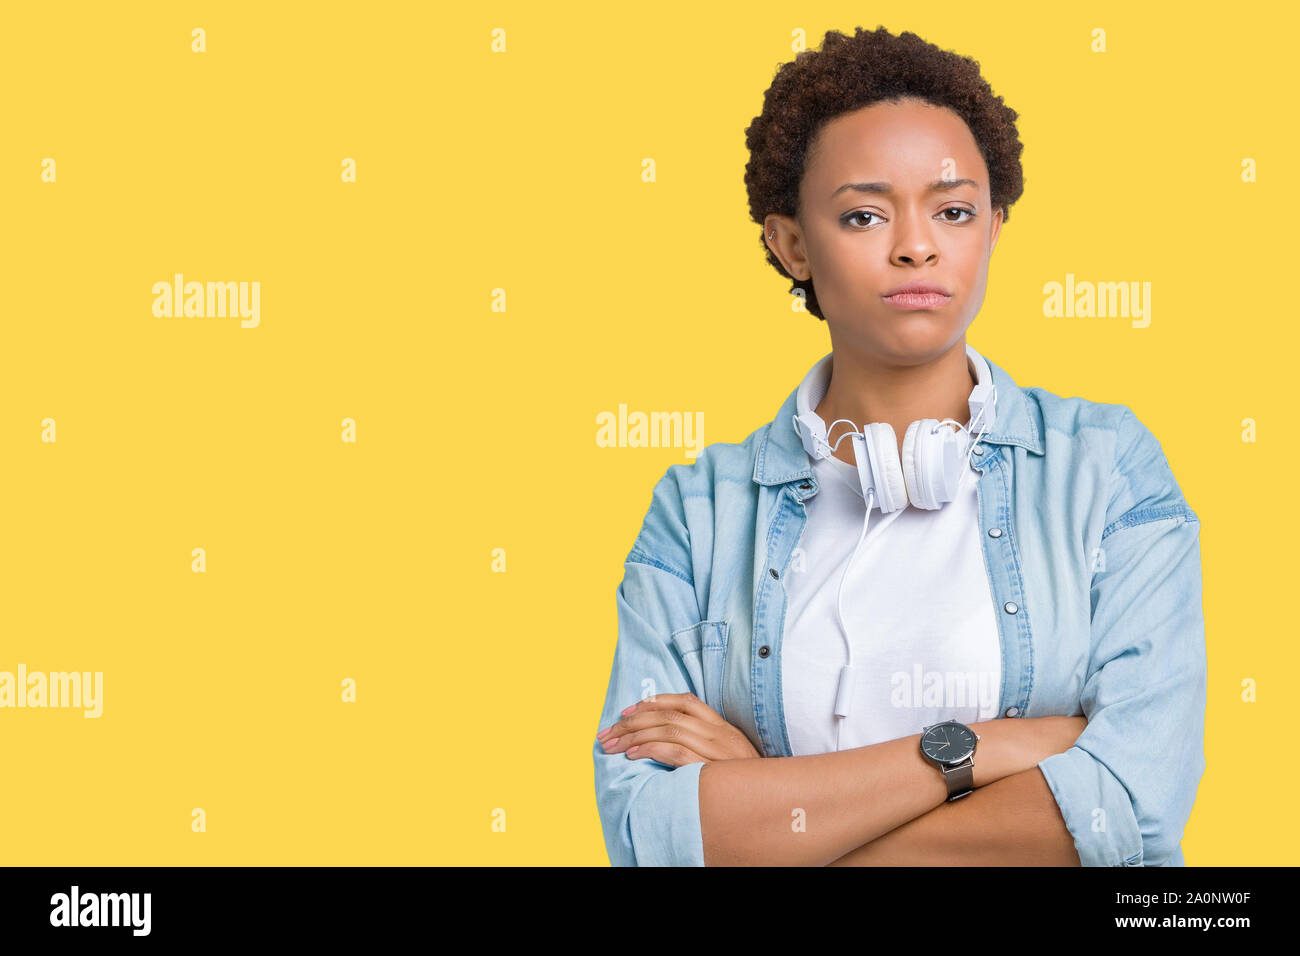 Young african american woman wearing headphones over isolated background skeptic and nervous, disapproving expression on face with crossed arms. Negat Stock Photo